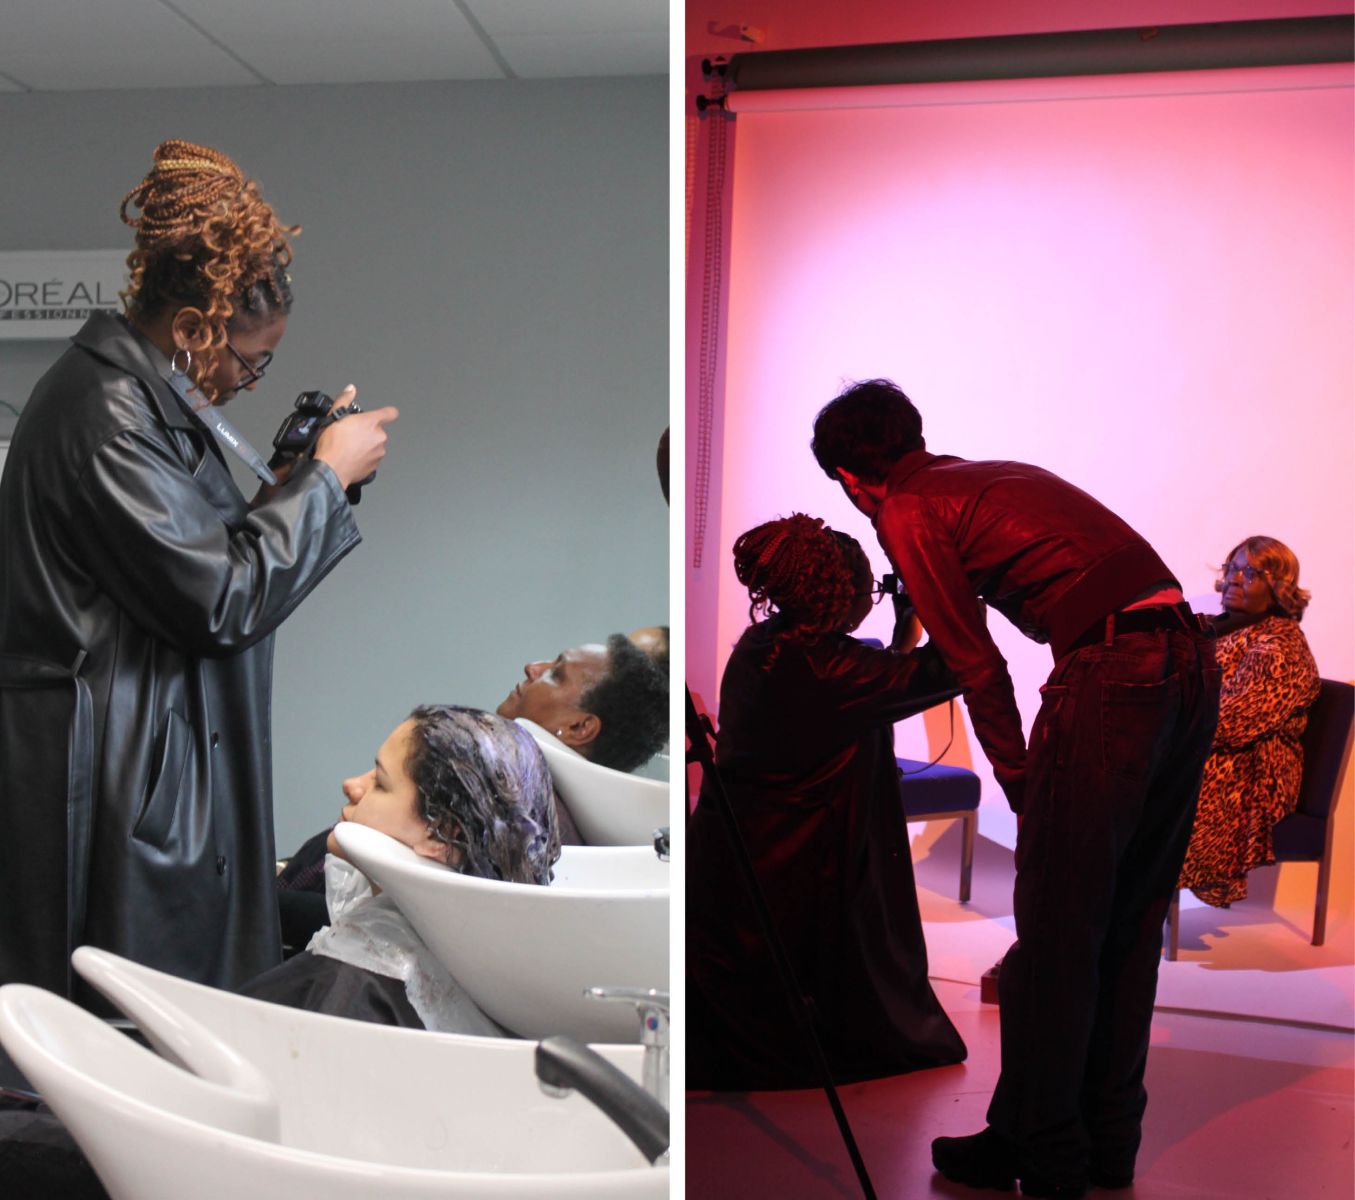 Two photos of Creative Arts & Media students photographing guests in the salon and photography studio